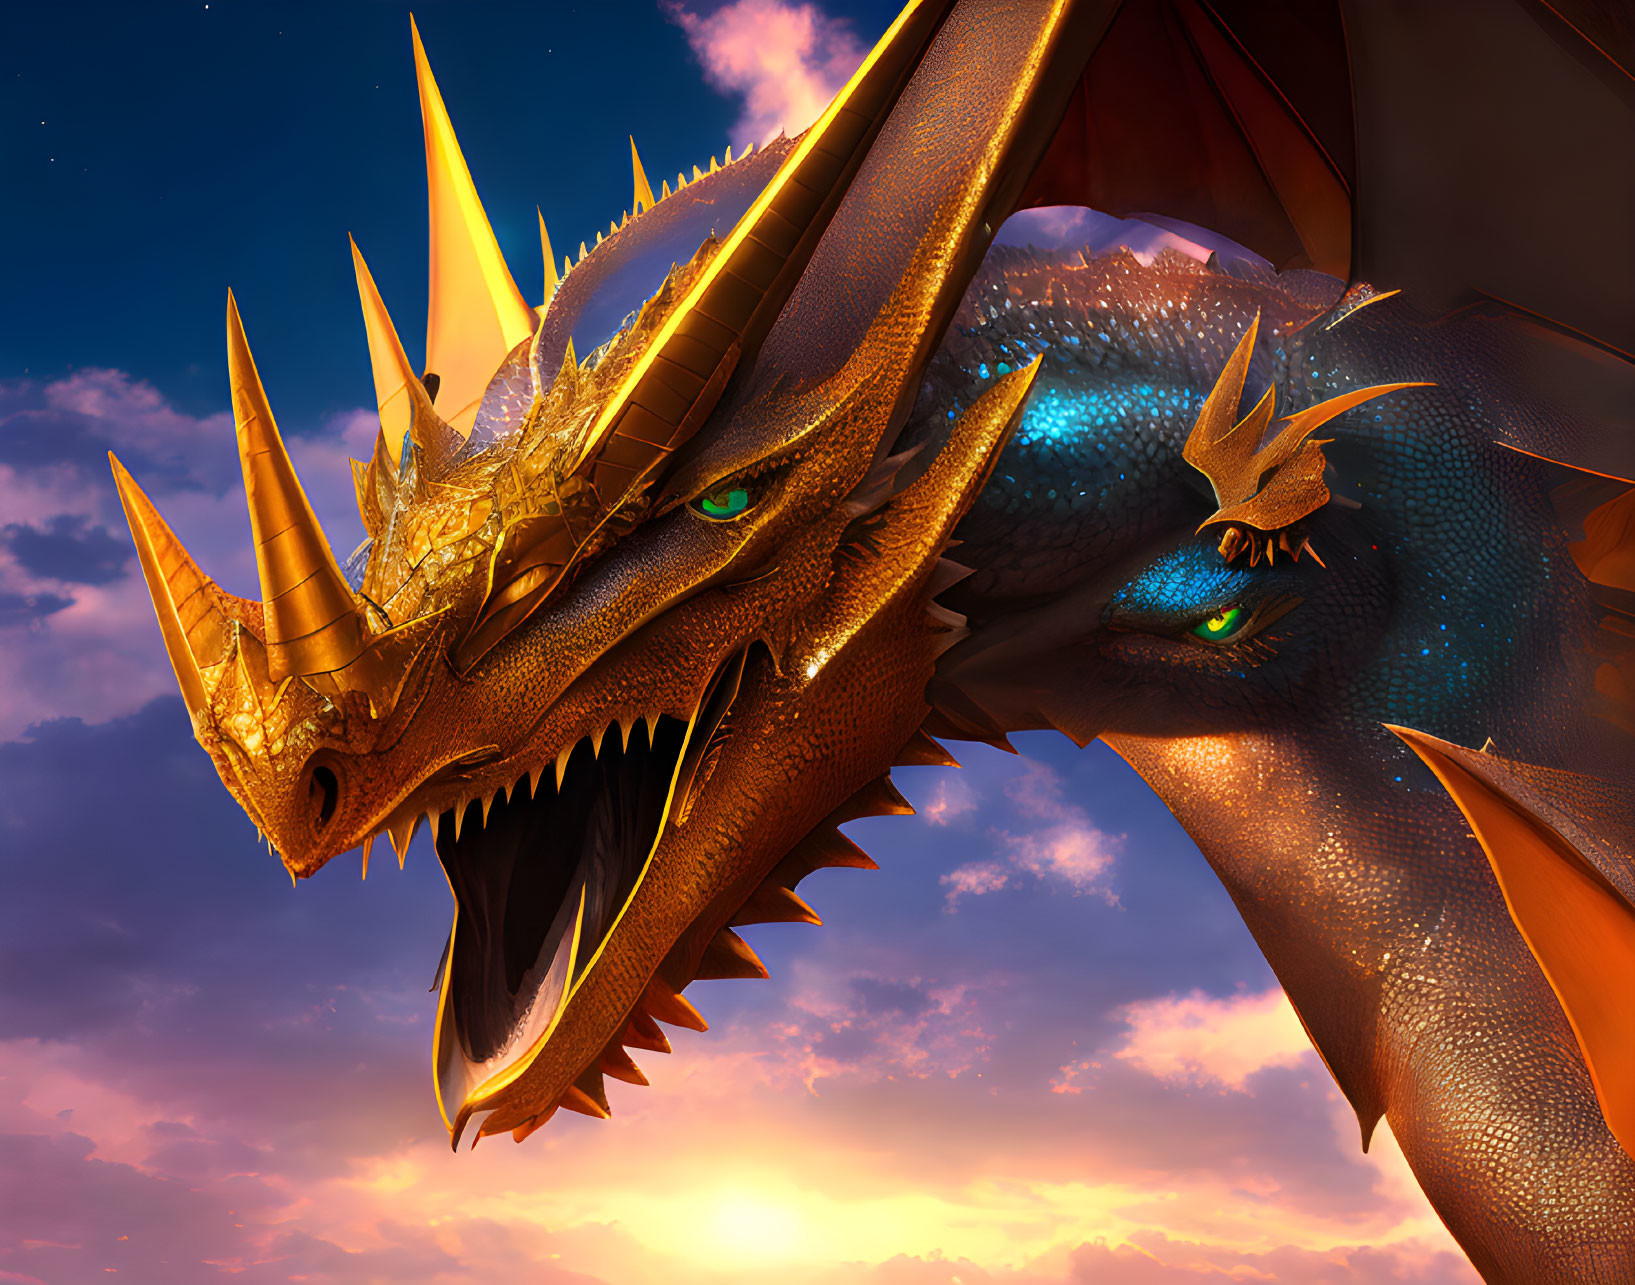 Golden-horned dragon with blue scales in dramatic sunset scene